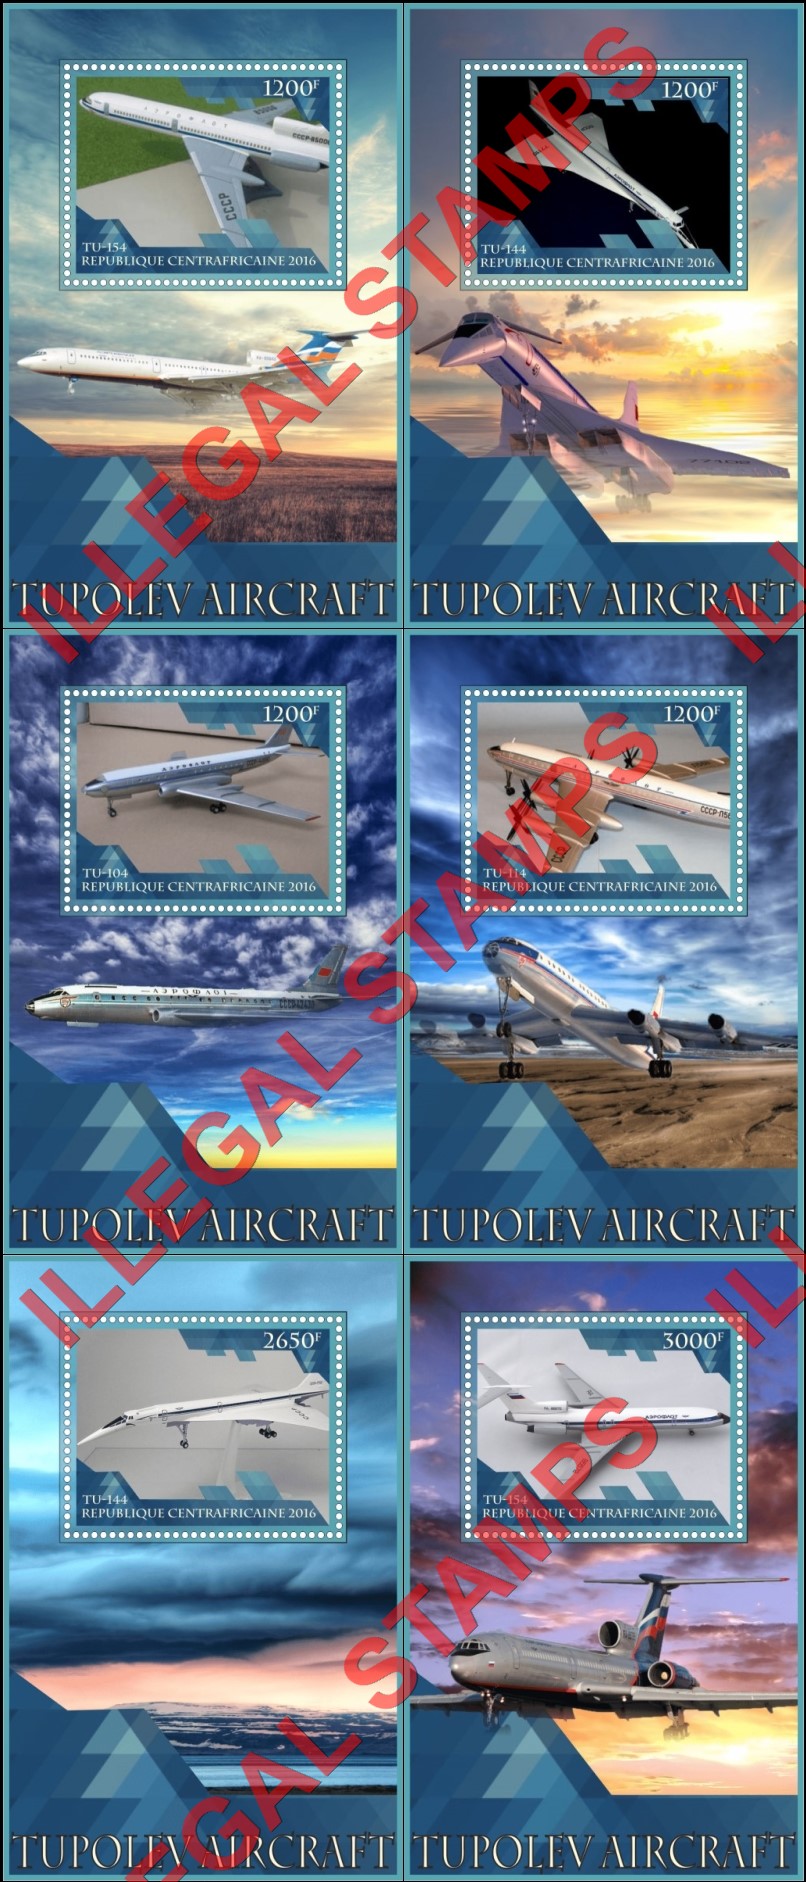 Central African Republic 2016 Tupolev Aircraft (different) Illegal Stamp Souvenir Sheets of 1